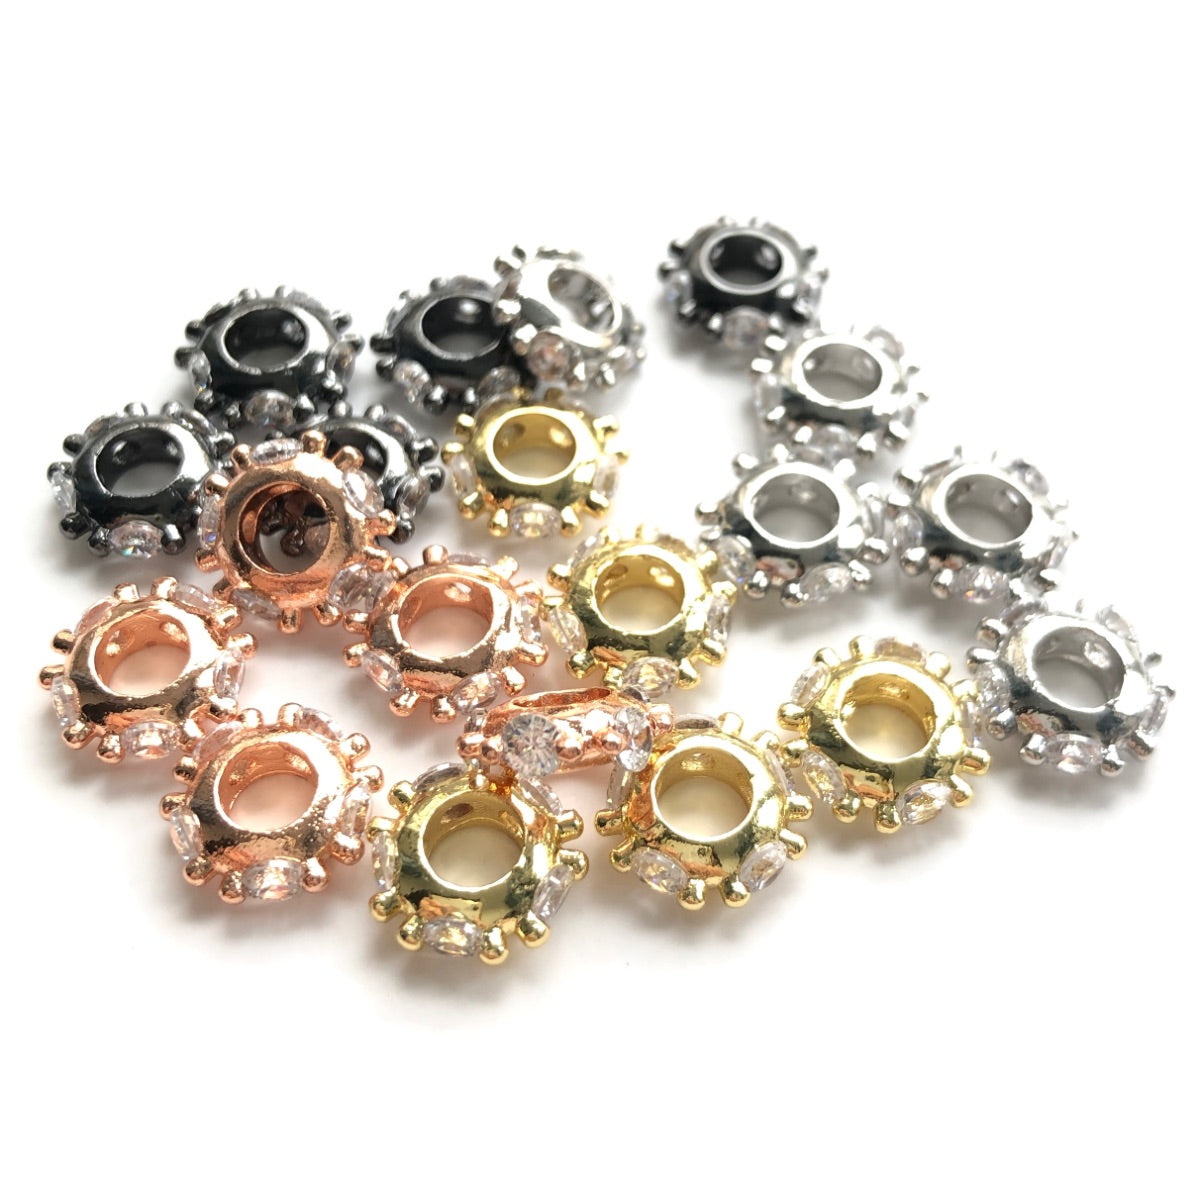 20pcs/lot 10*3mm Big Size CZ Pave Wheel Rondelle Spacers Mix Colors CZ Paved Spacers New Spacers Arrivals Rondelle Beads Charms Beads Beyond